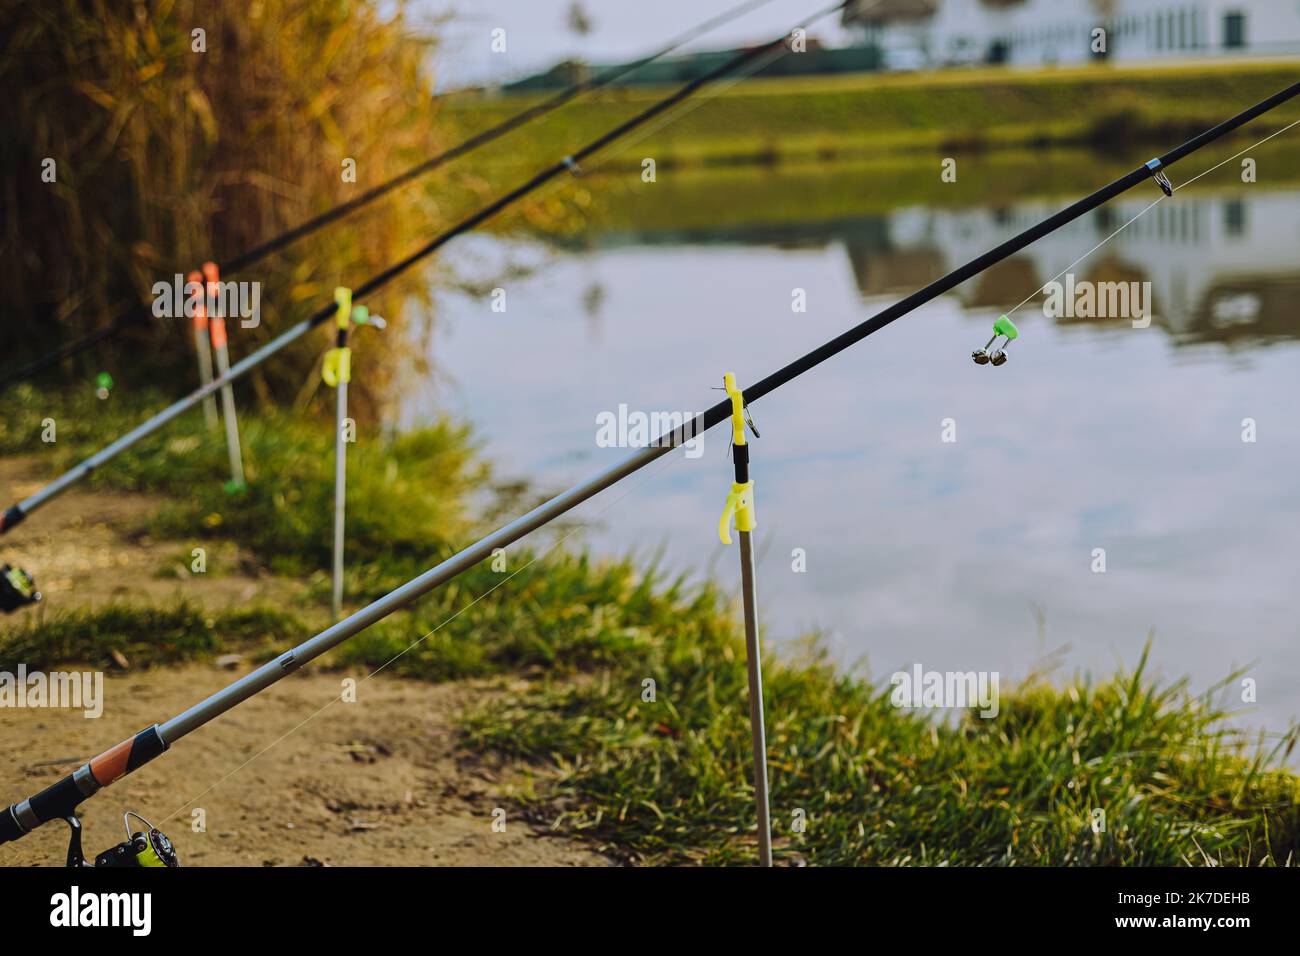 https://c8.alamy.com/comp/2K7DEHB/fishing-on-the-lake-fishing-rods-on-the-background-of-the-lake-and-houses-sports-fishing-the-bell-hangs-on-a-fishing-line-selective-focus-2K7DEHB.jpg